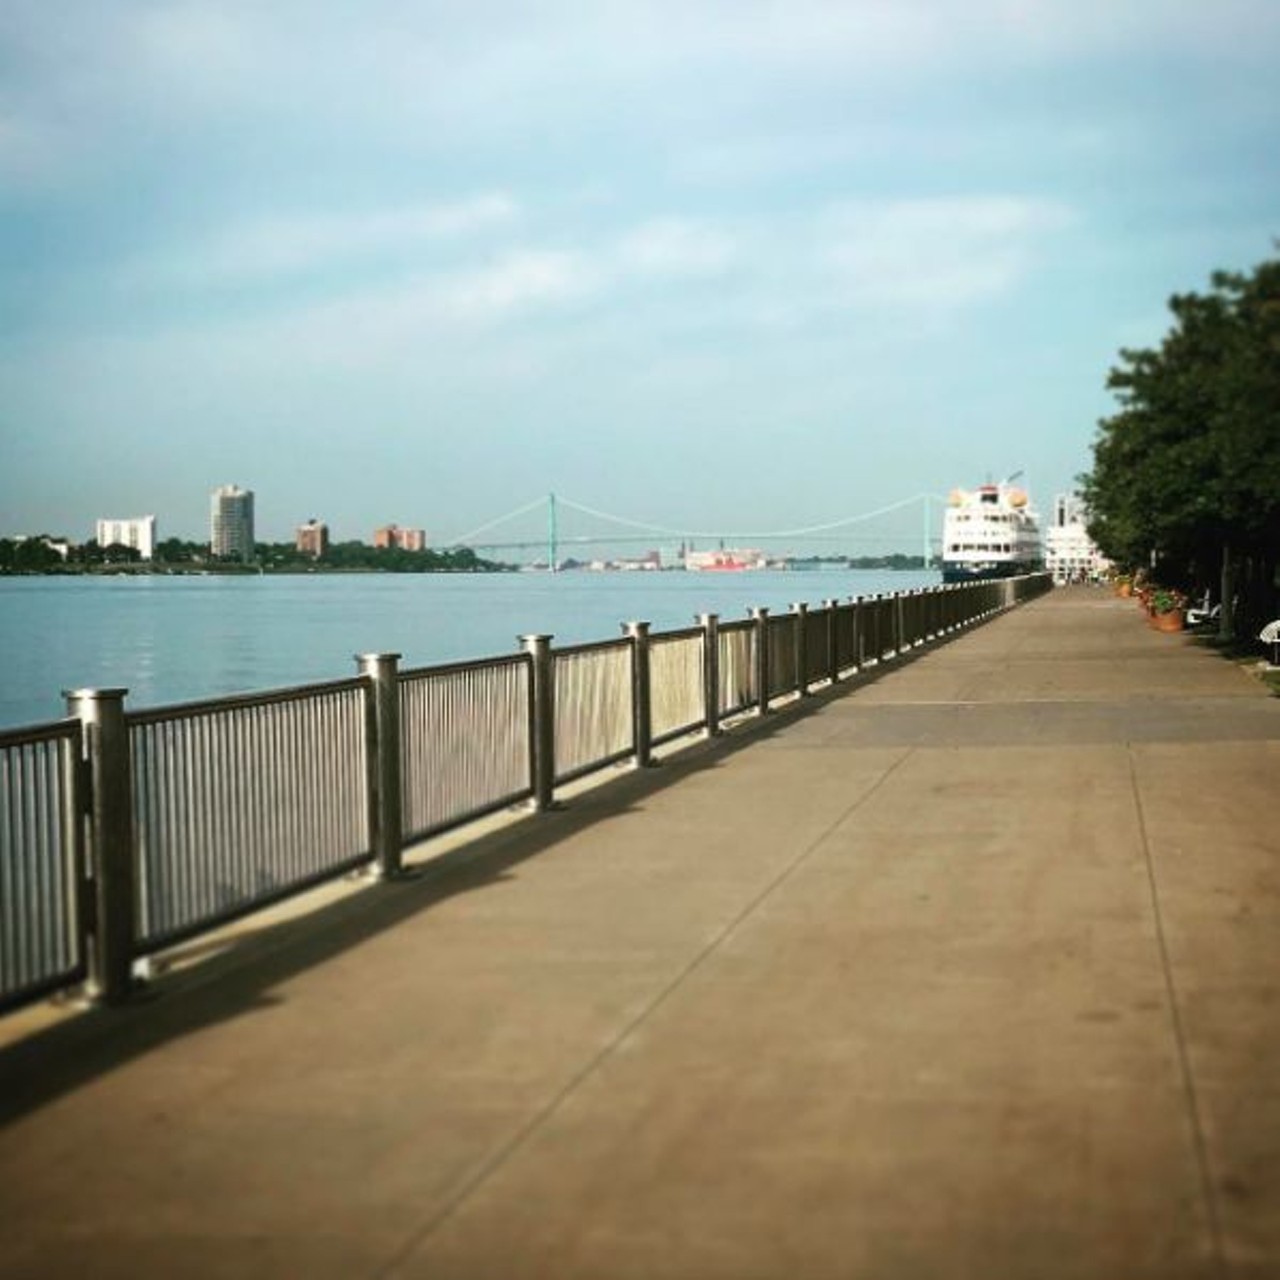 Detroit Riverwalk
With views of Detroit skyscrapers on one side the Detroit River on the other side, the Detroit Riverwalk is one of the best places to go for a run downtown. If you are looking to avoid the traffic and people but still be a part of the downtown atmosphere, hit up this beautiful paved pathway.
Photo via IG user @mrs.sarahsattler